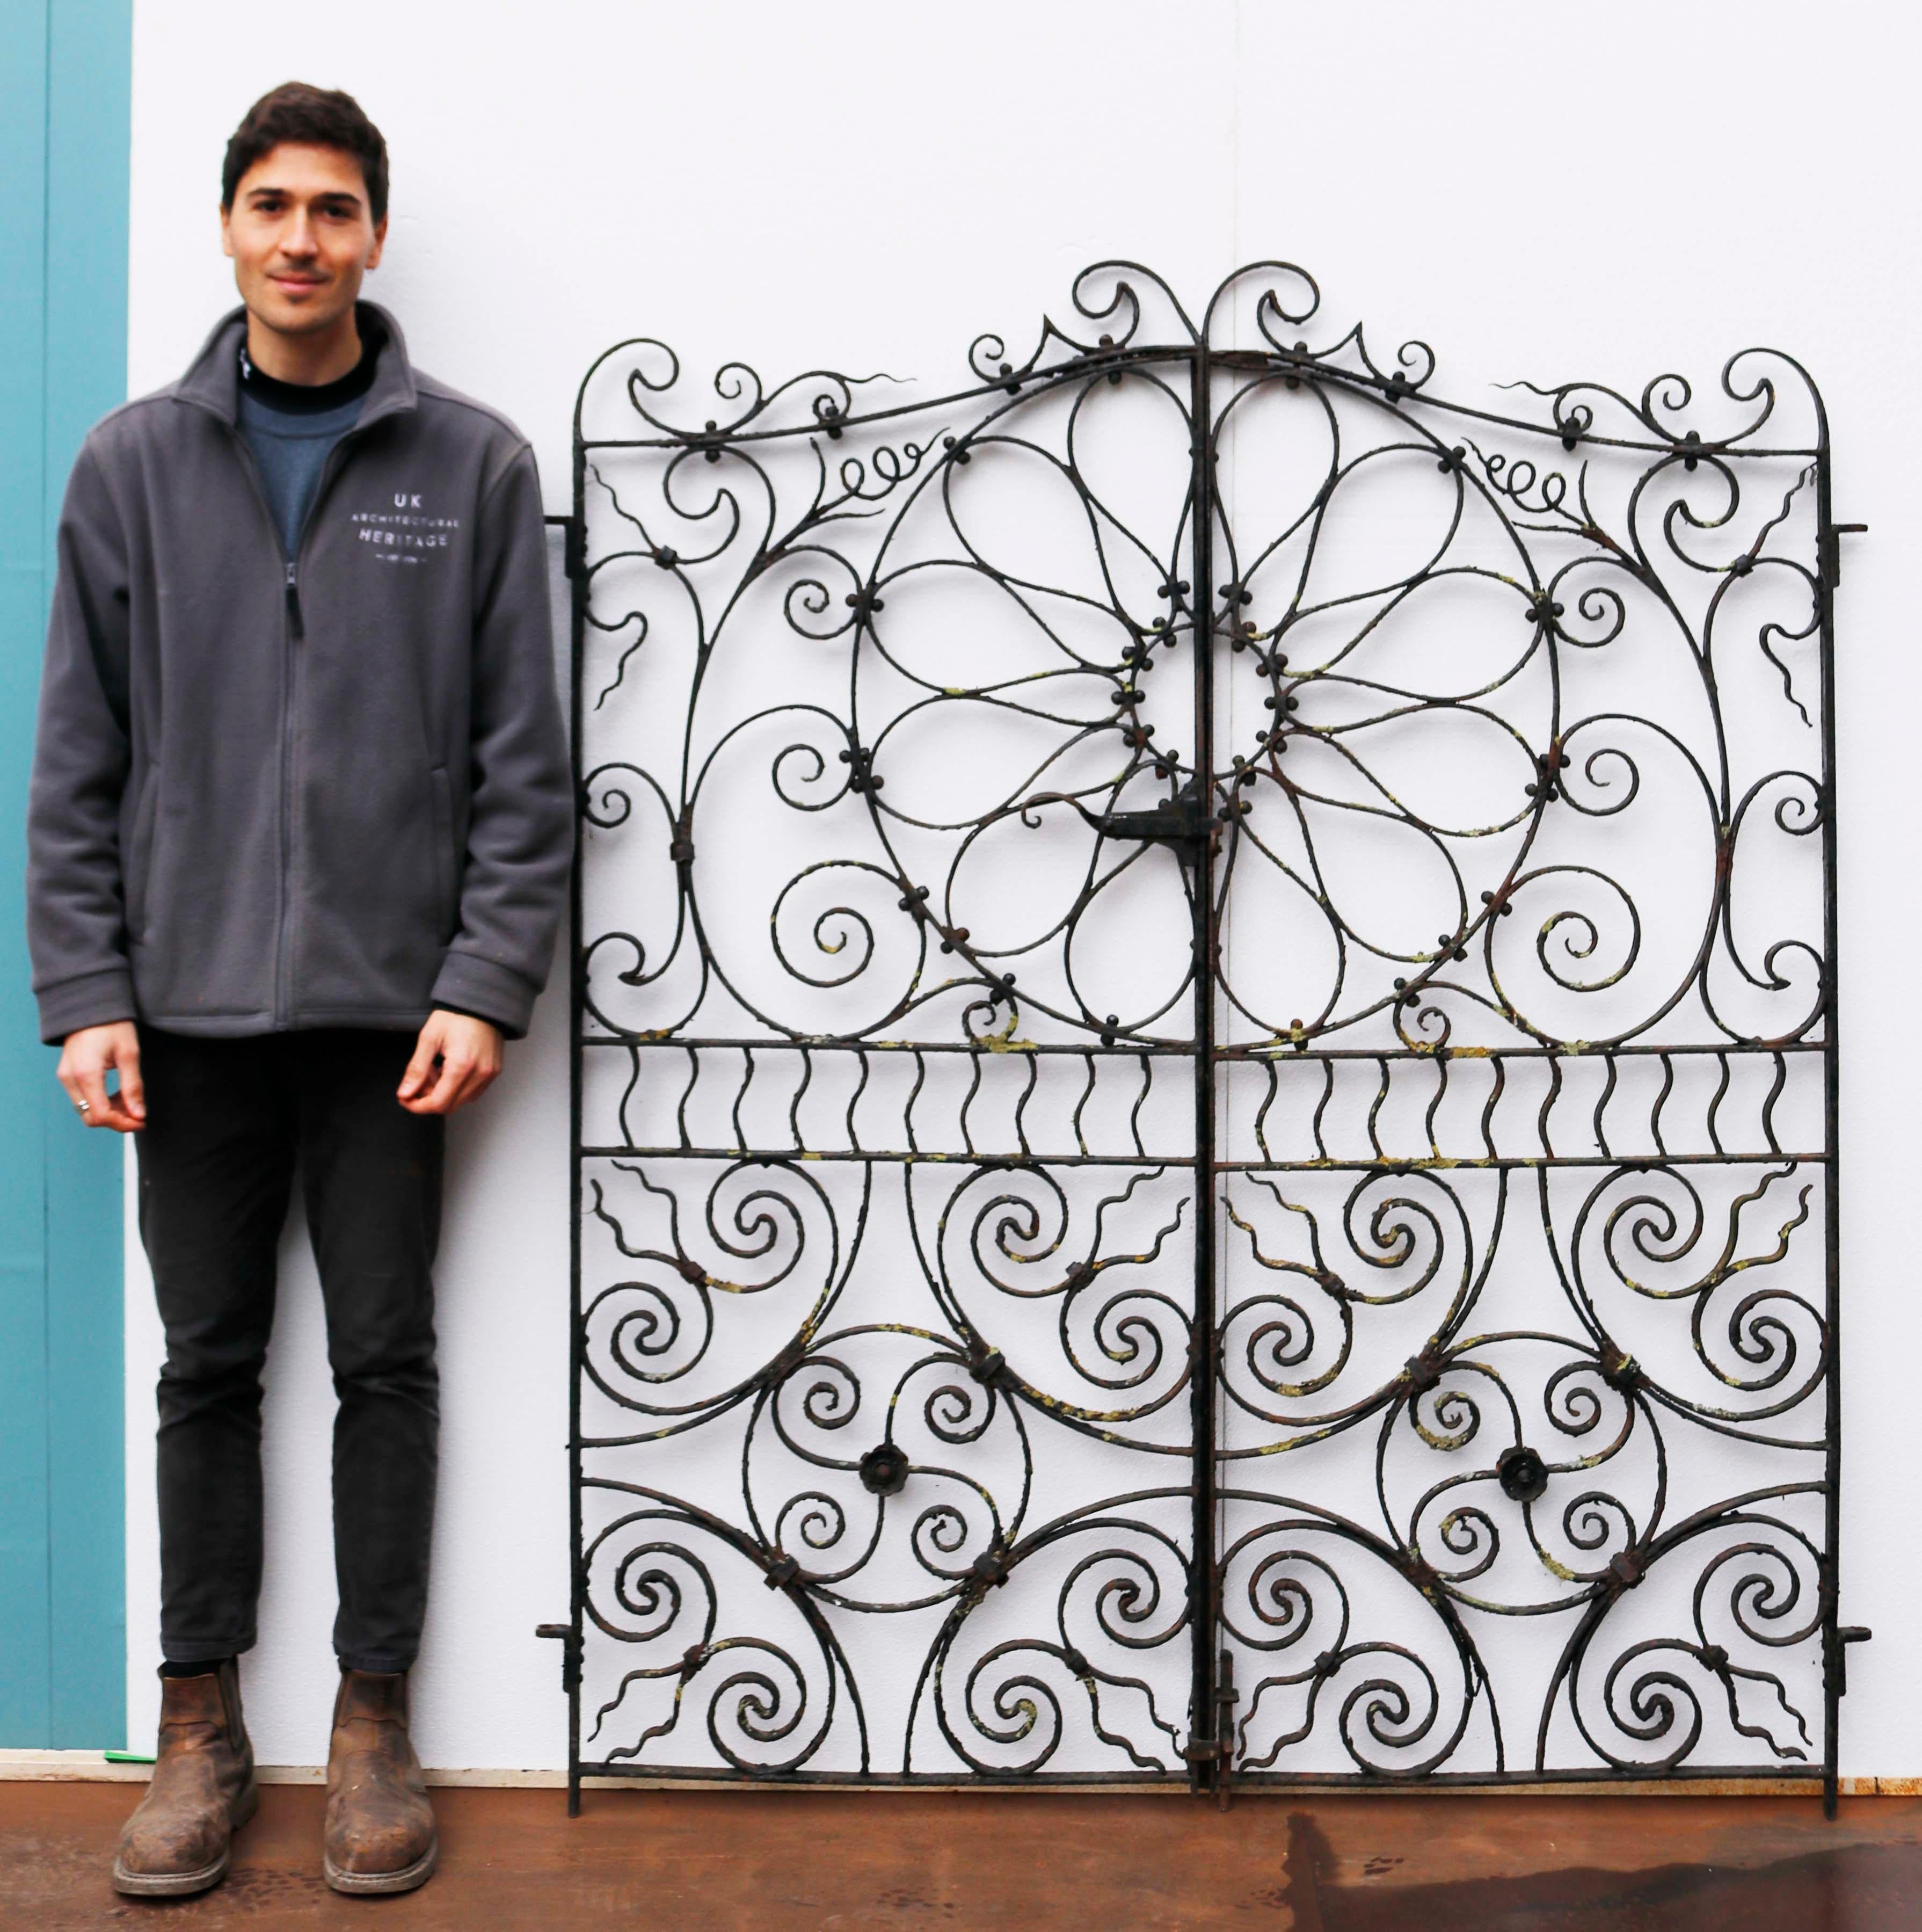 Set of mid-Victorian Pedestrian gates. These Blacksmith made gates have an unusual repeated scrolling pattern featuring a centre roundel.

Additional dimensions
For an opening of approximately 149 cm.